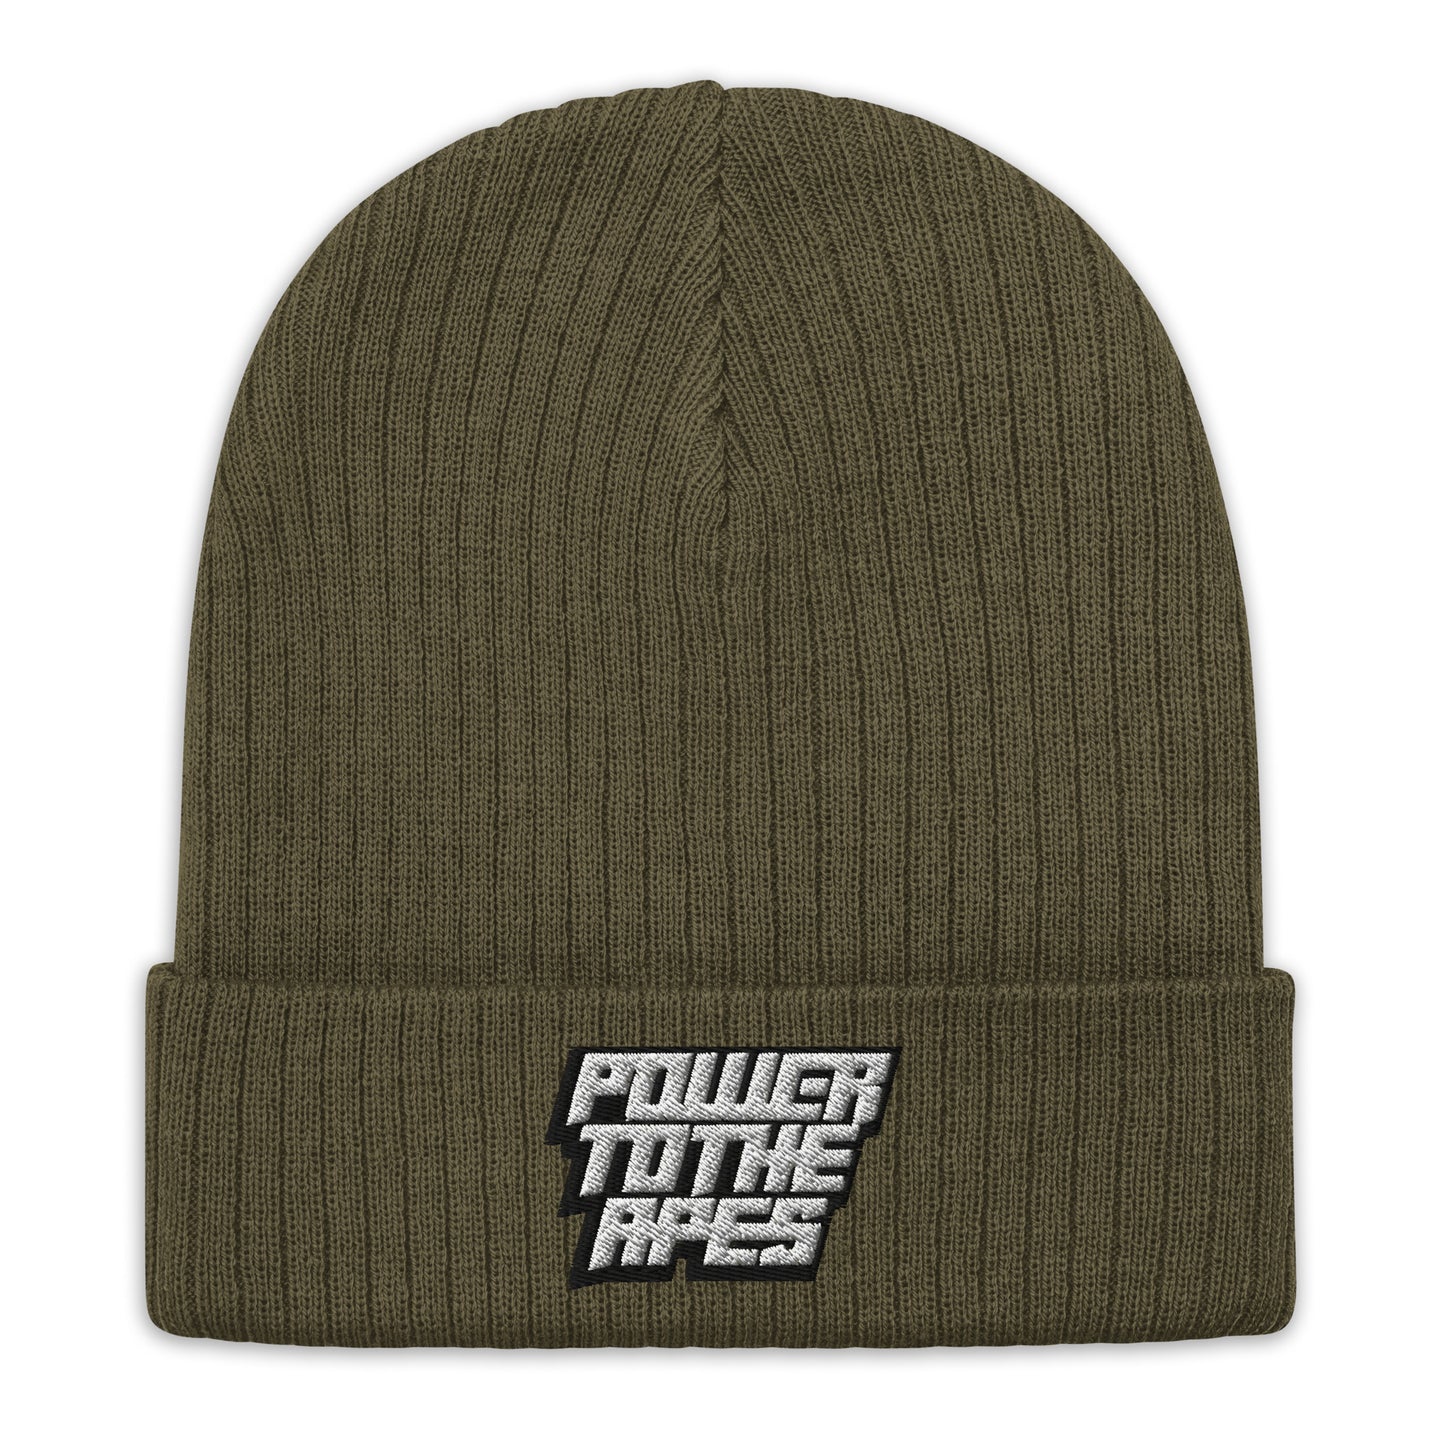 Power to the apes Ribbed knit beanie